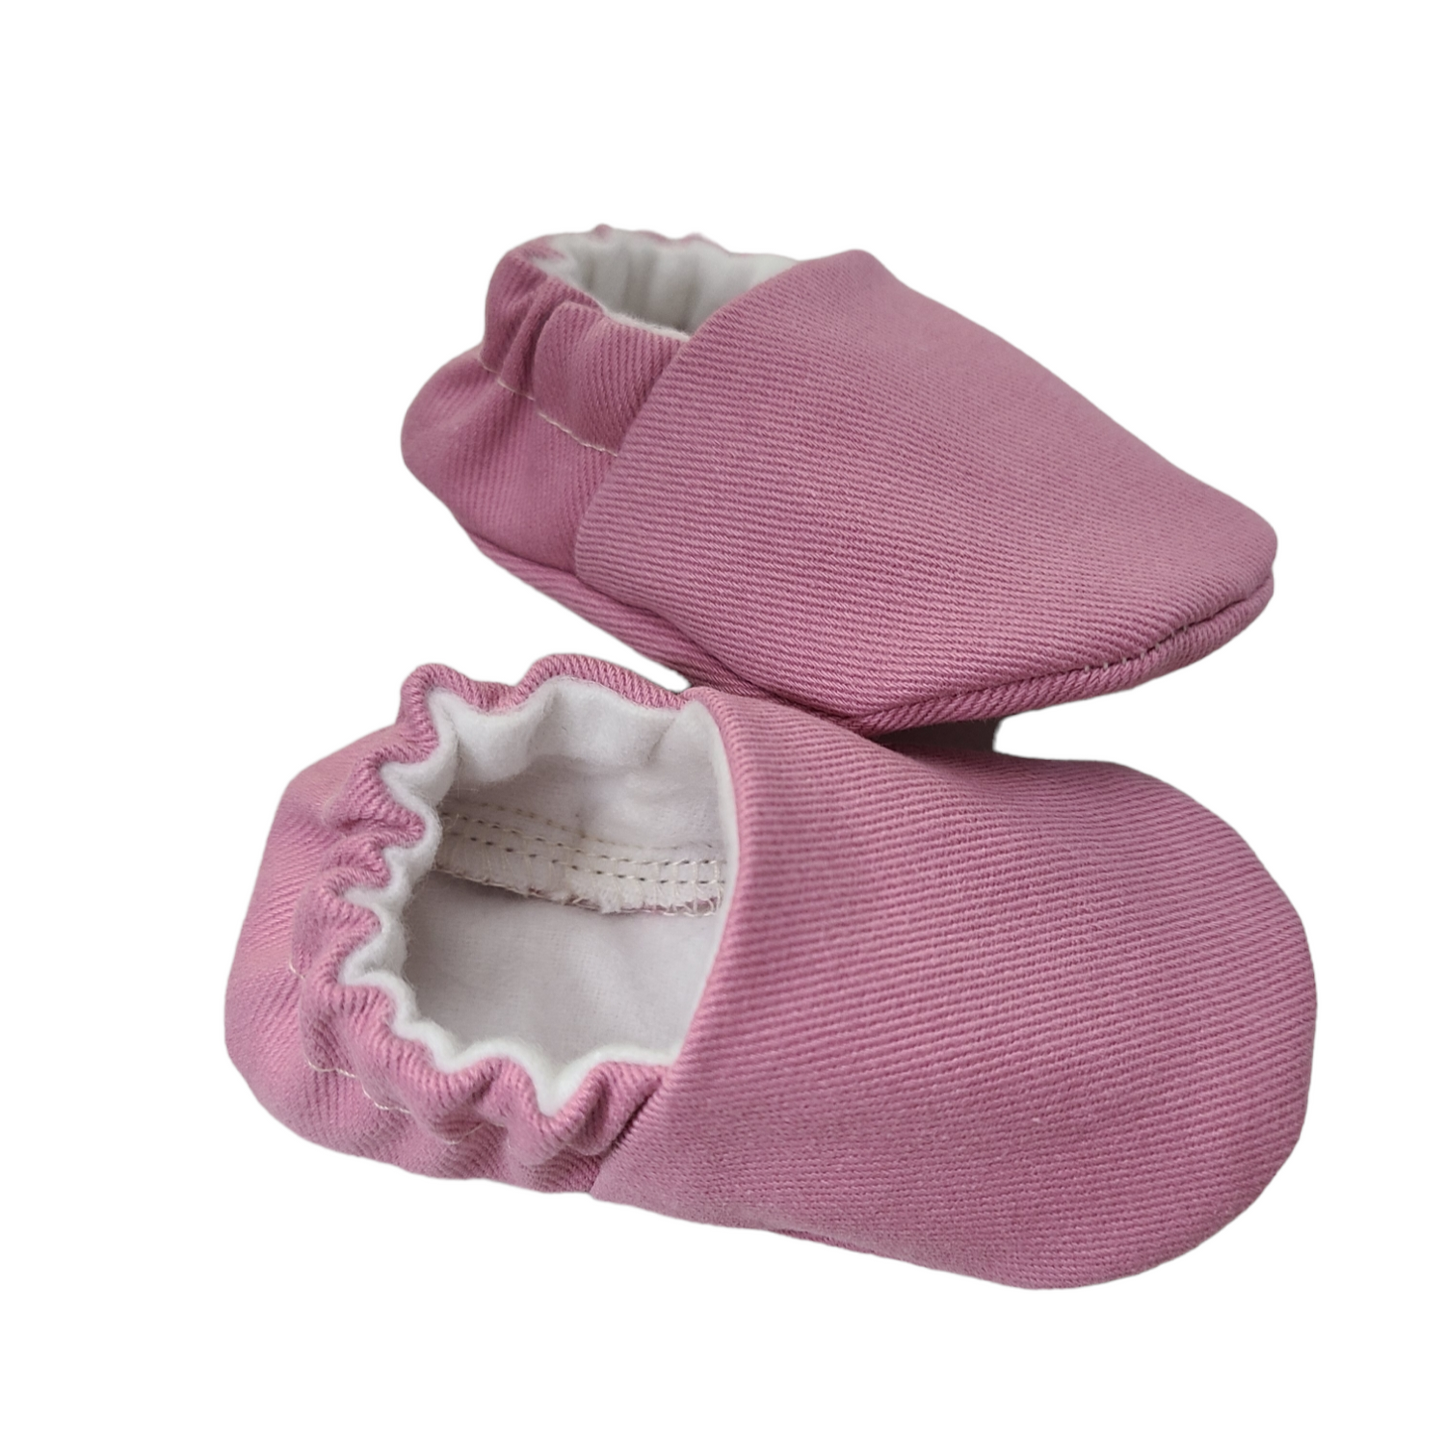 Pink Baby Girl Shoes, Pink Baby Gift, Baby Slippers, pink Baby Shoes, Baby Mocc, Baby Shoes, Newborn Slippers, Baby Girl Slippers, toddler slippers